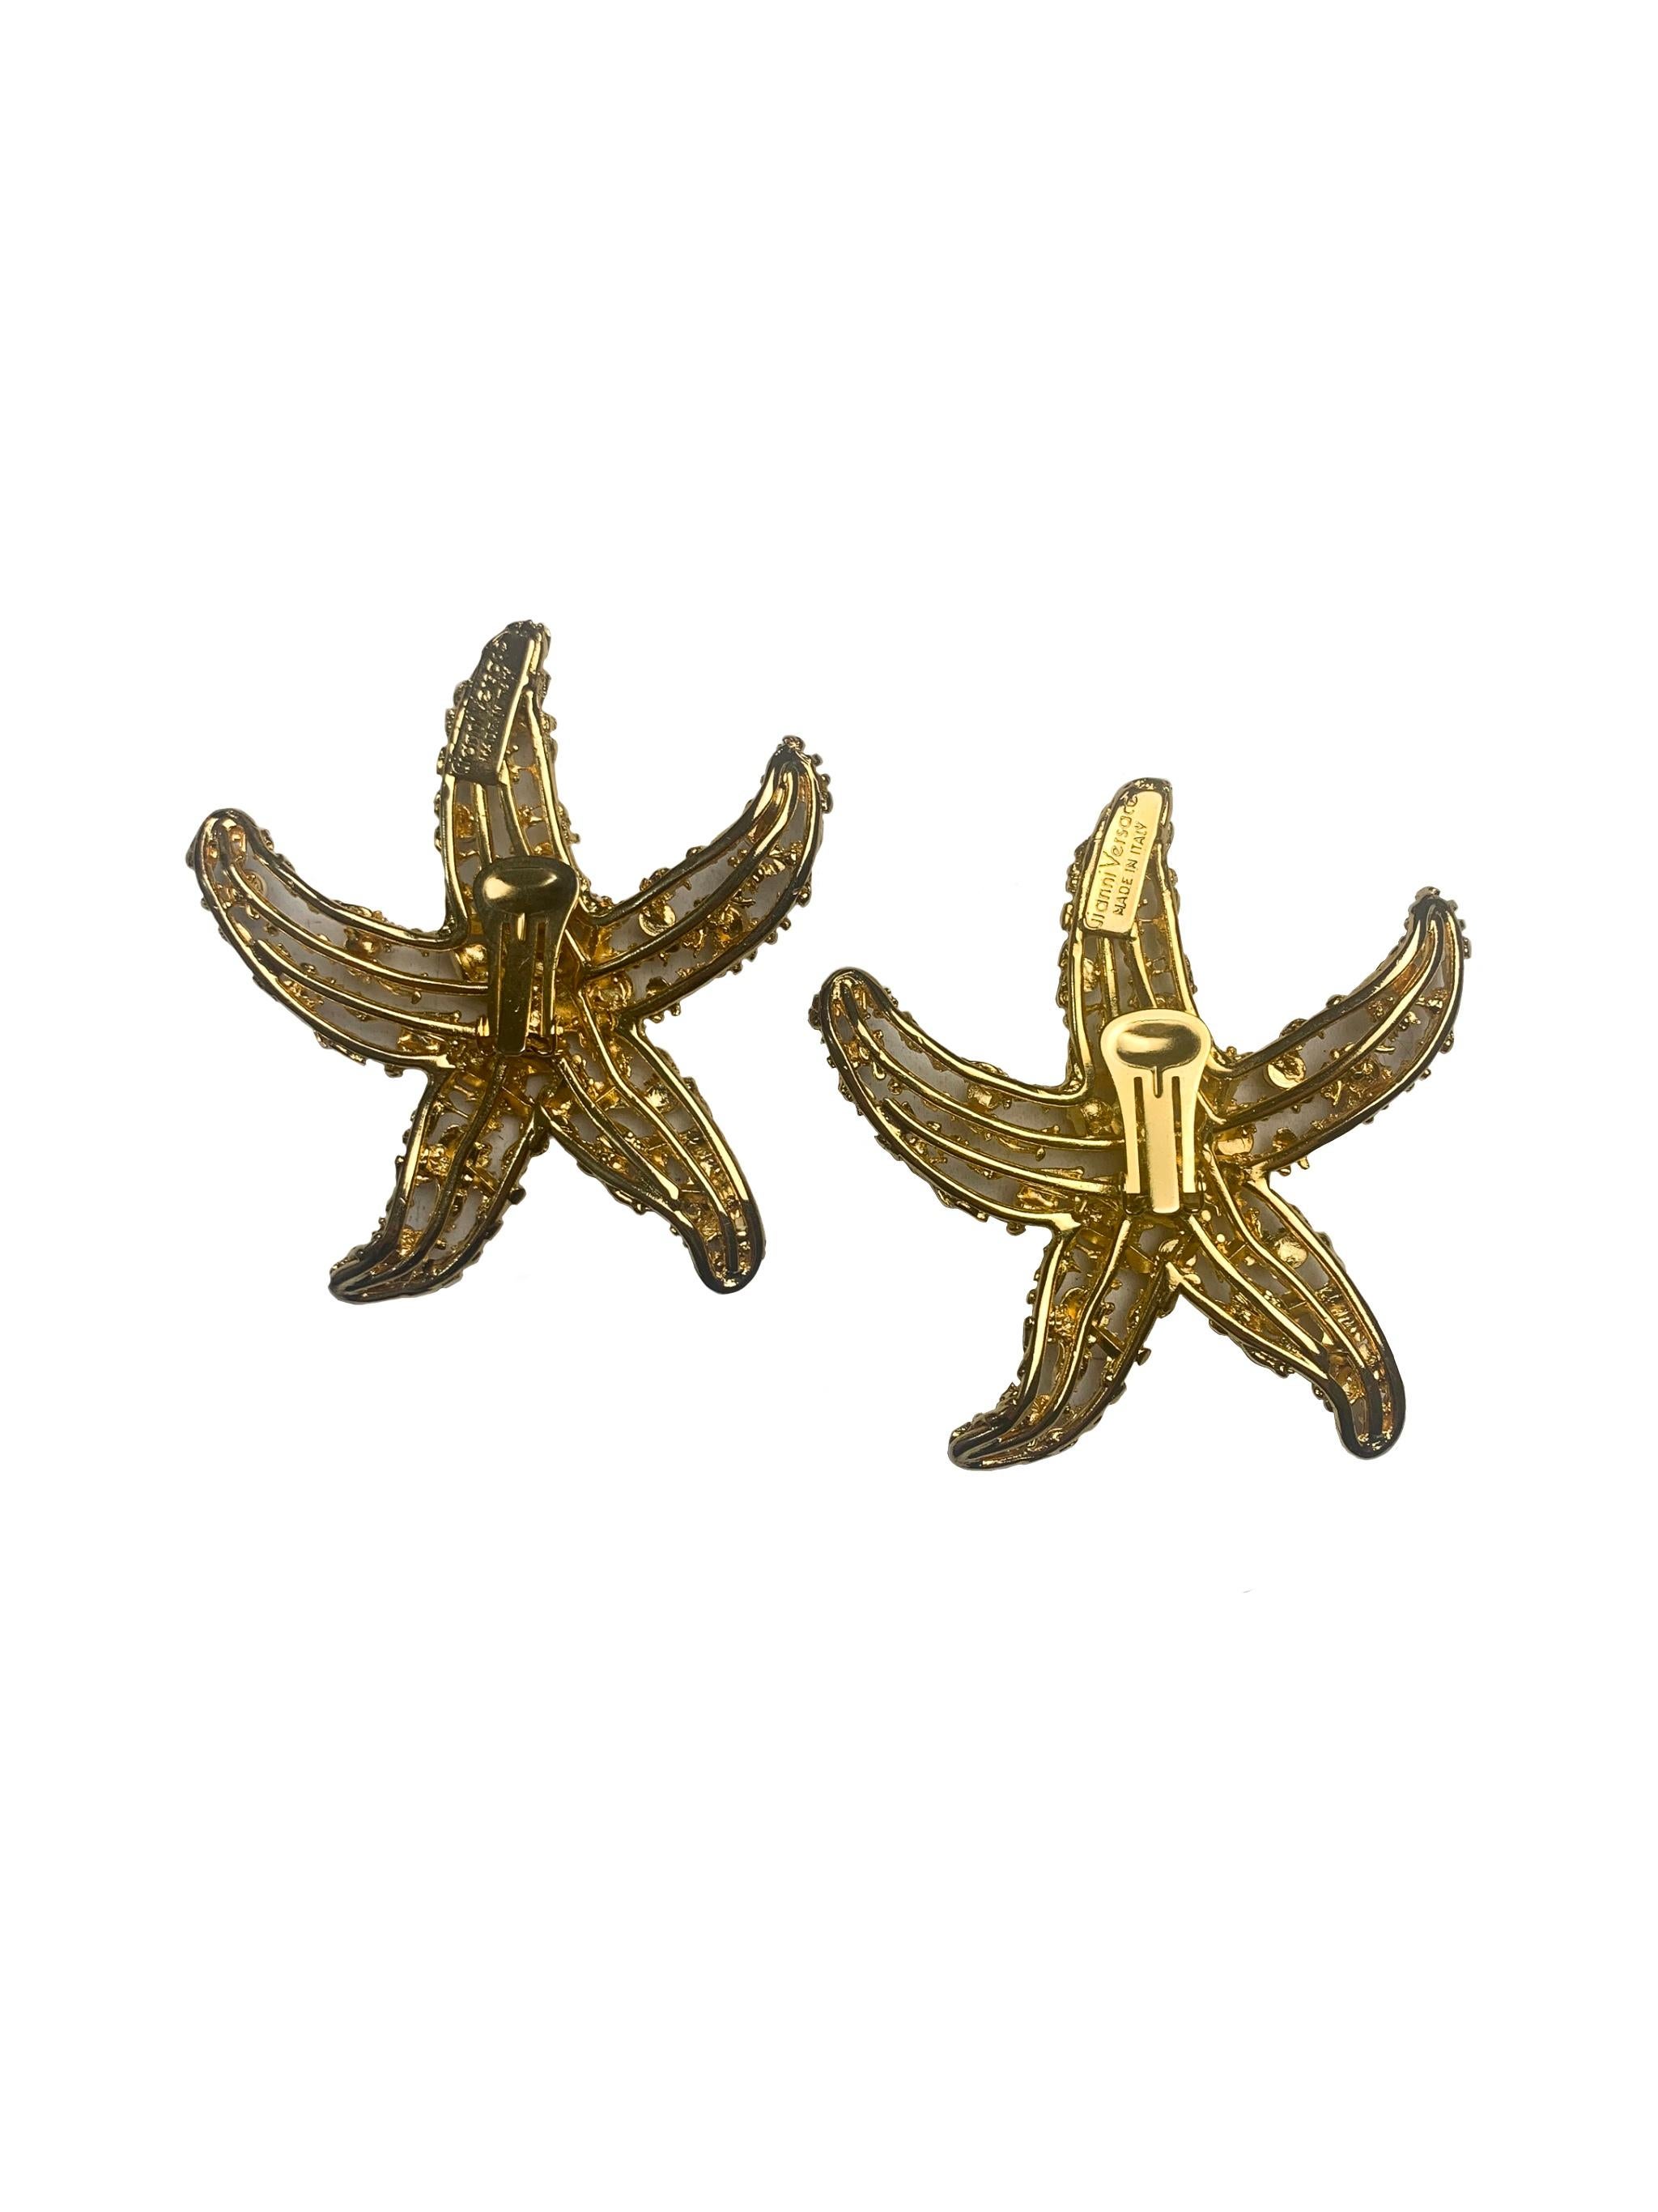 These Gianni Versace 1992 starfish earrings are from the Spring Summer 1992 collection. Heavily inspired by an underwater theme Versace the gold tone earrings feature a cutout starfish design. Carved and crafted the earrings also feature intricate